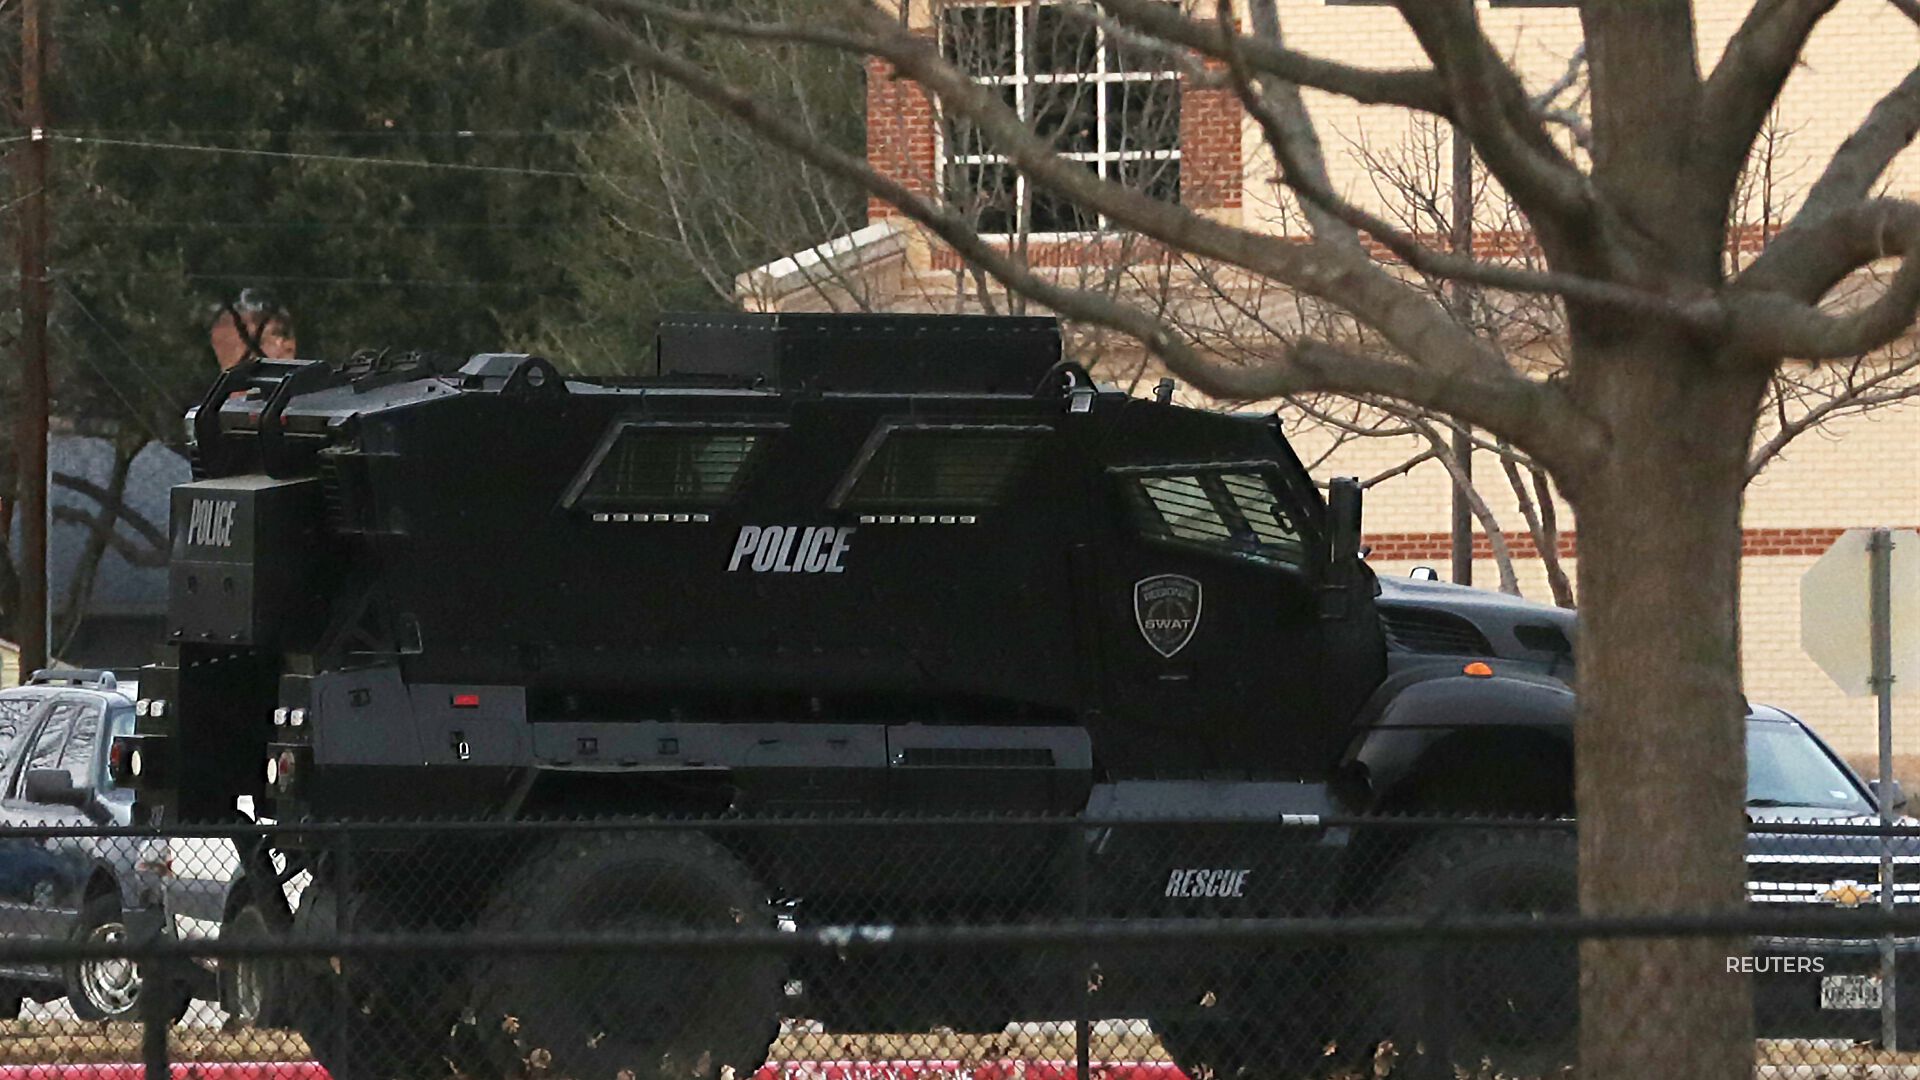 The investigation into the Texas synagogue hostage situation continued Monday.